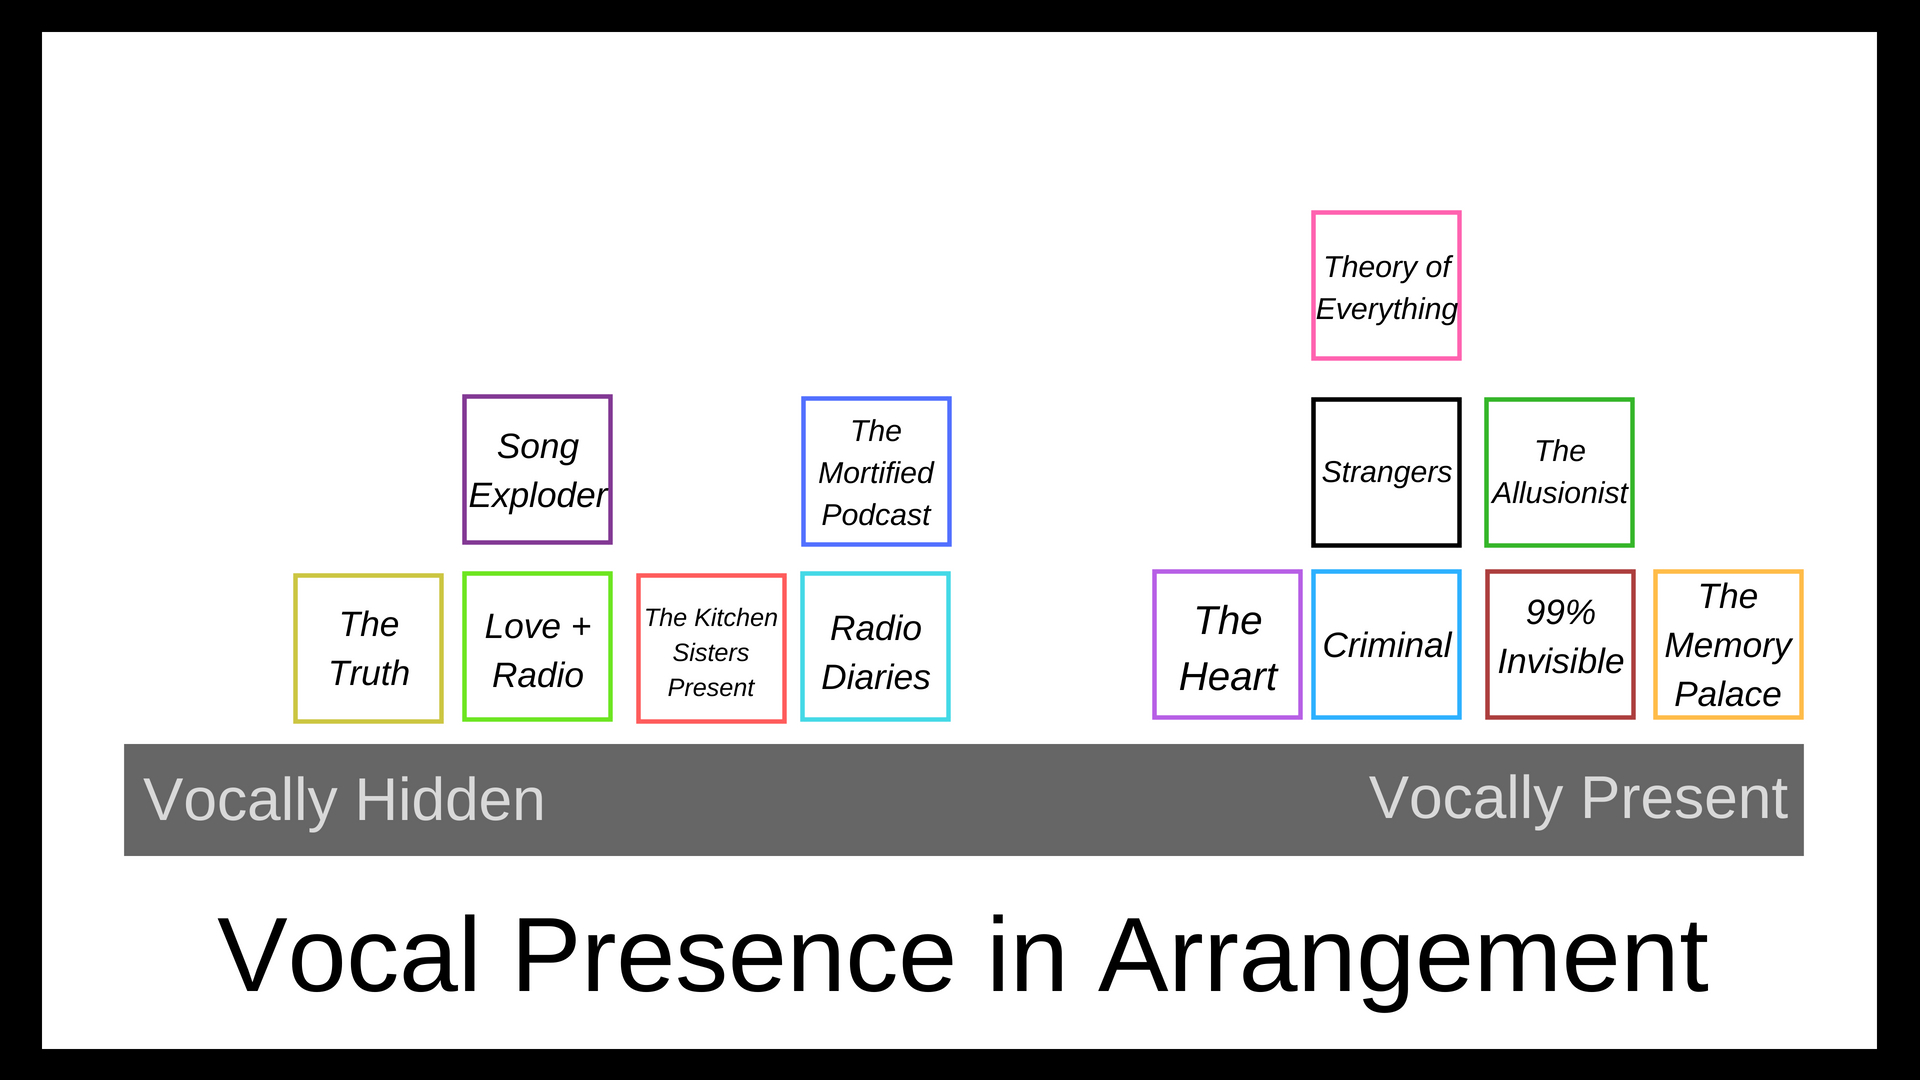 Chart titled Vocal Presence in Arragement. Vocally Hidden is on the left; Vocally present is on the right. Text includes the names of the podcasts in order from hidden to present.